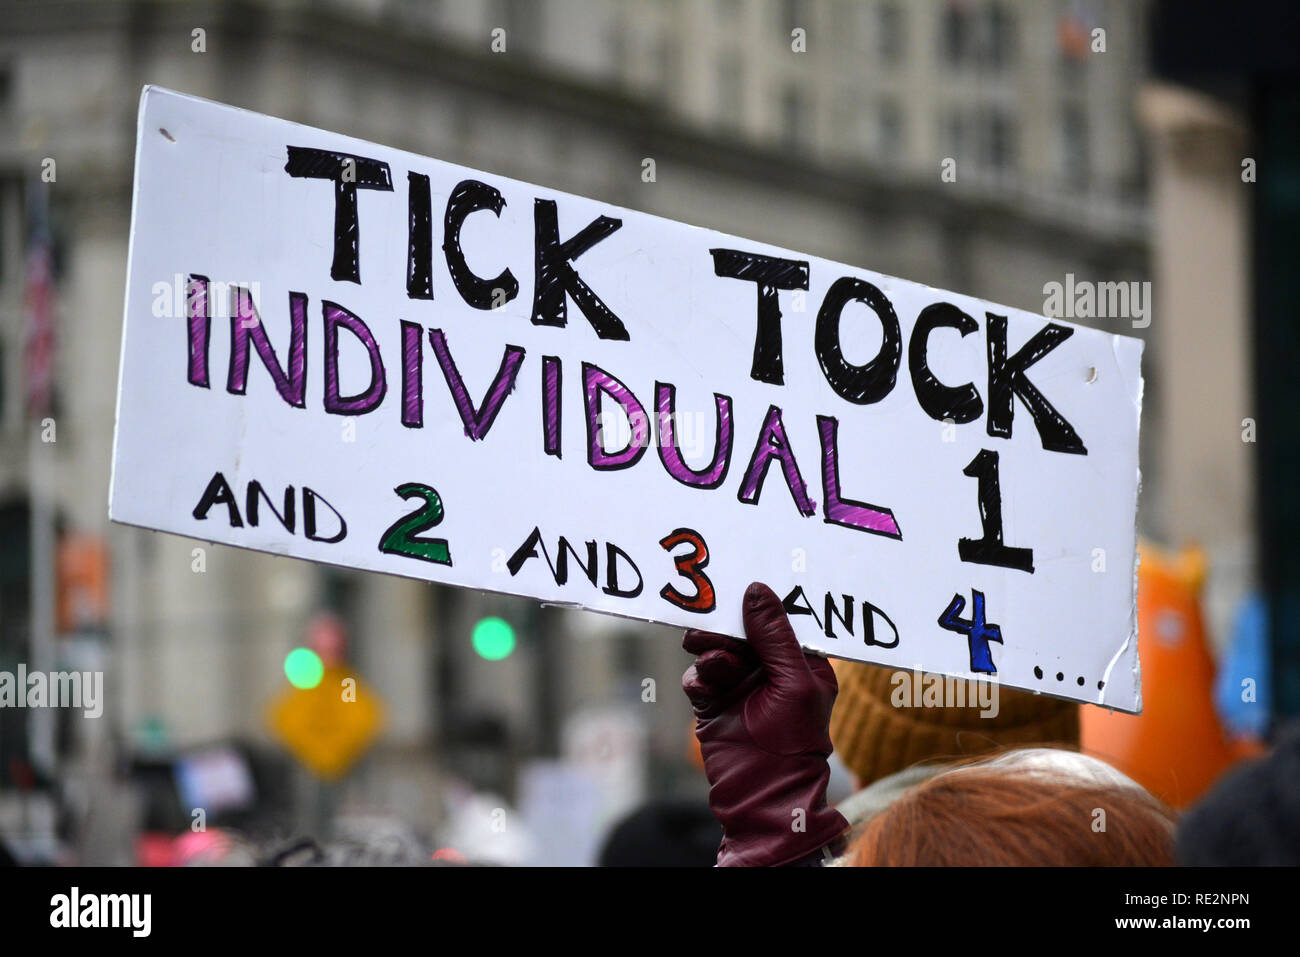 New York, USA. 19th January 2019. The Women's Unity March in Lower Manhattan. Credit: Christopher Penler/Alamy Live News Credit: Christopher Penler/Alamy Live News Stock Photo